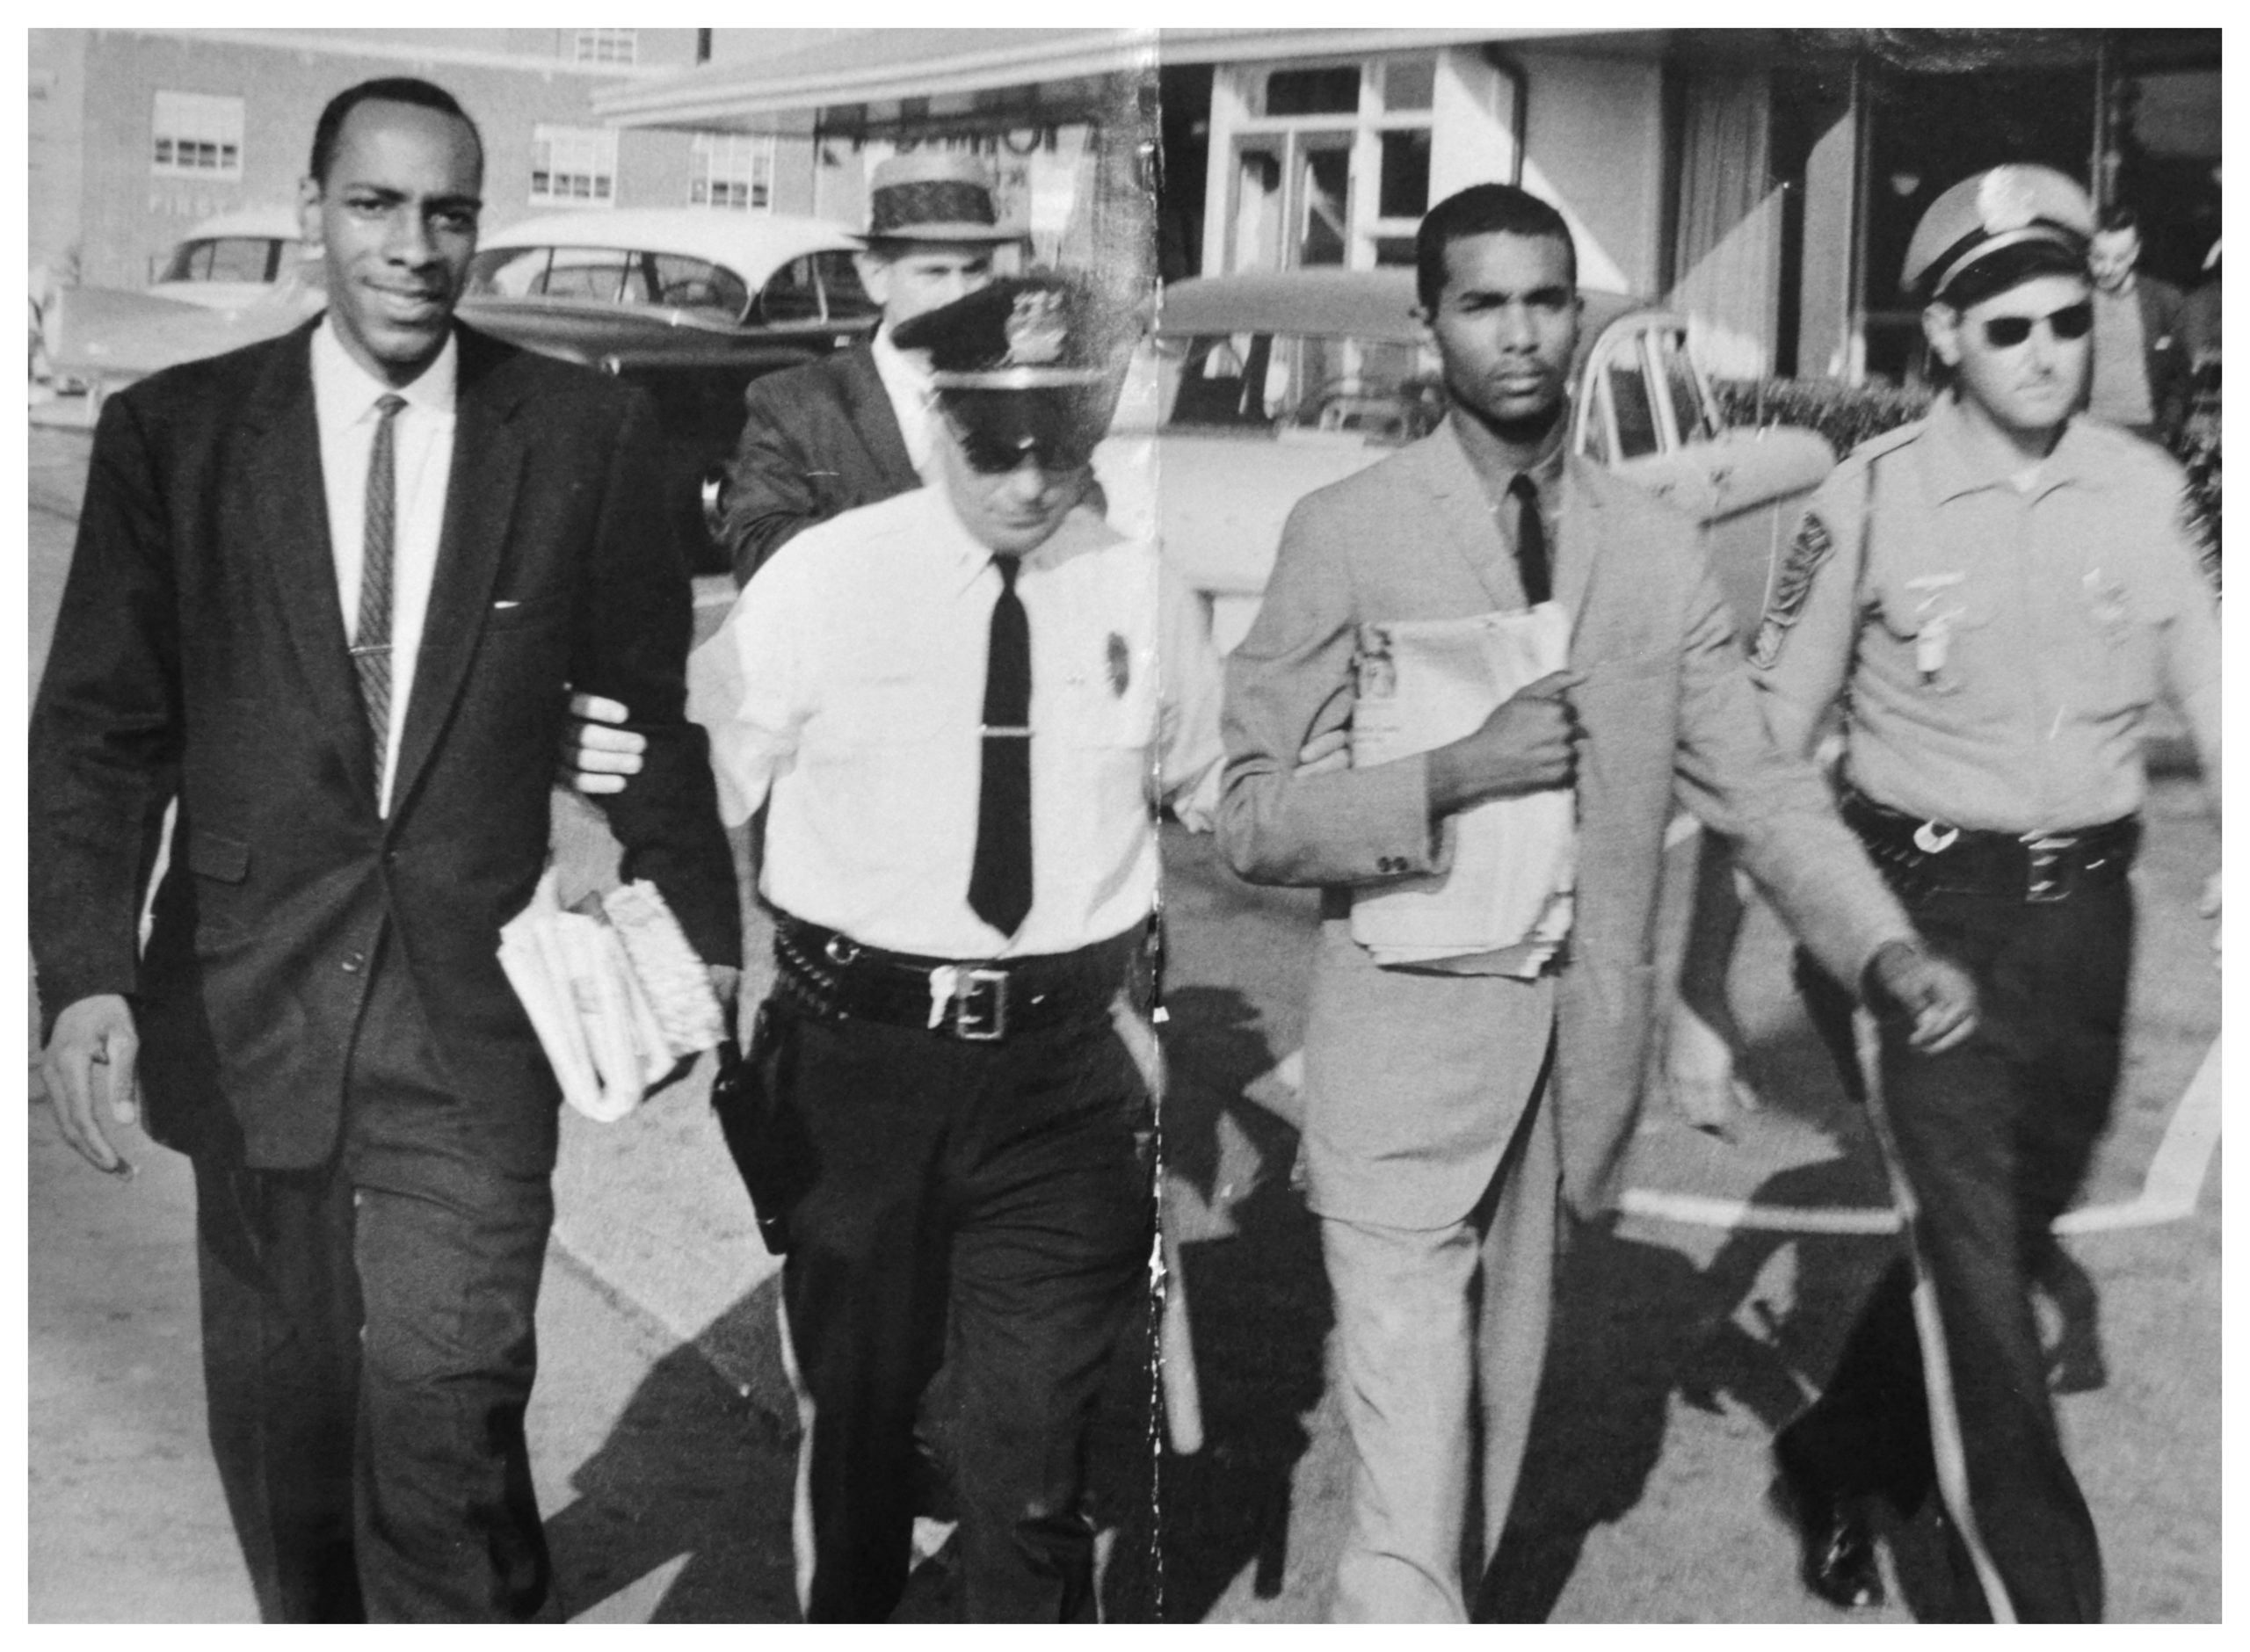 Civil rights demonstrators (also pictured to the left), seeking to be served at a Howard Johnson’s restaurant in Arlington, were led away by police after being arrested for trespassing. DC Public Library, Star Collection © Washington Post.